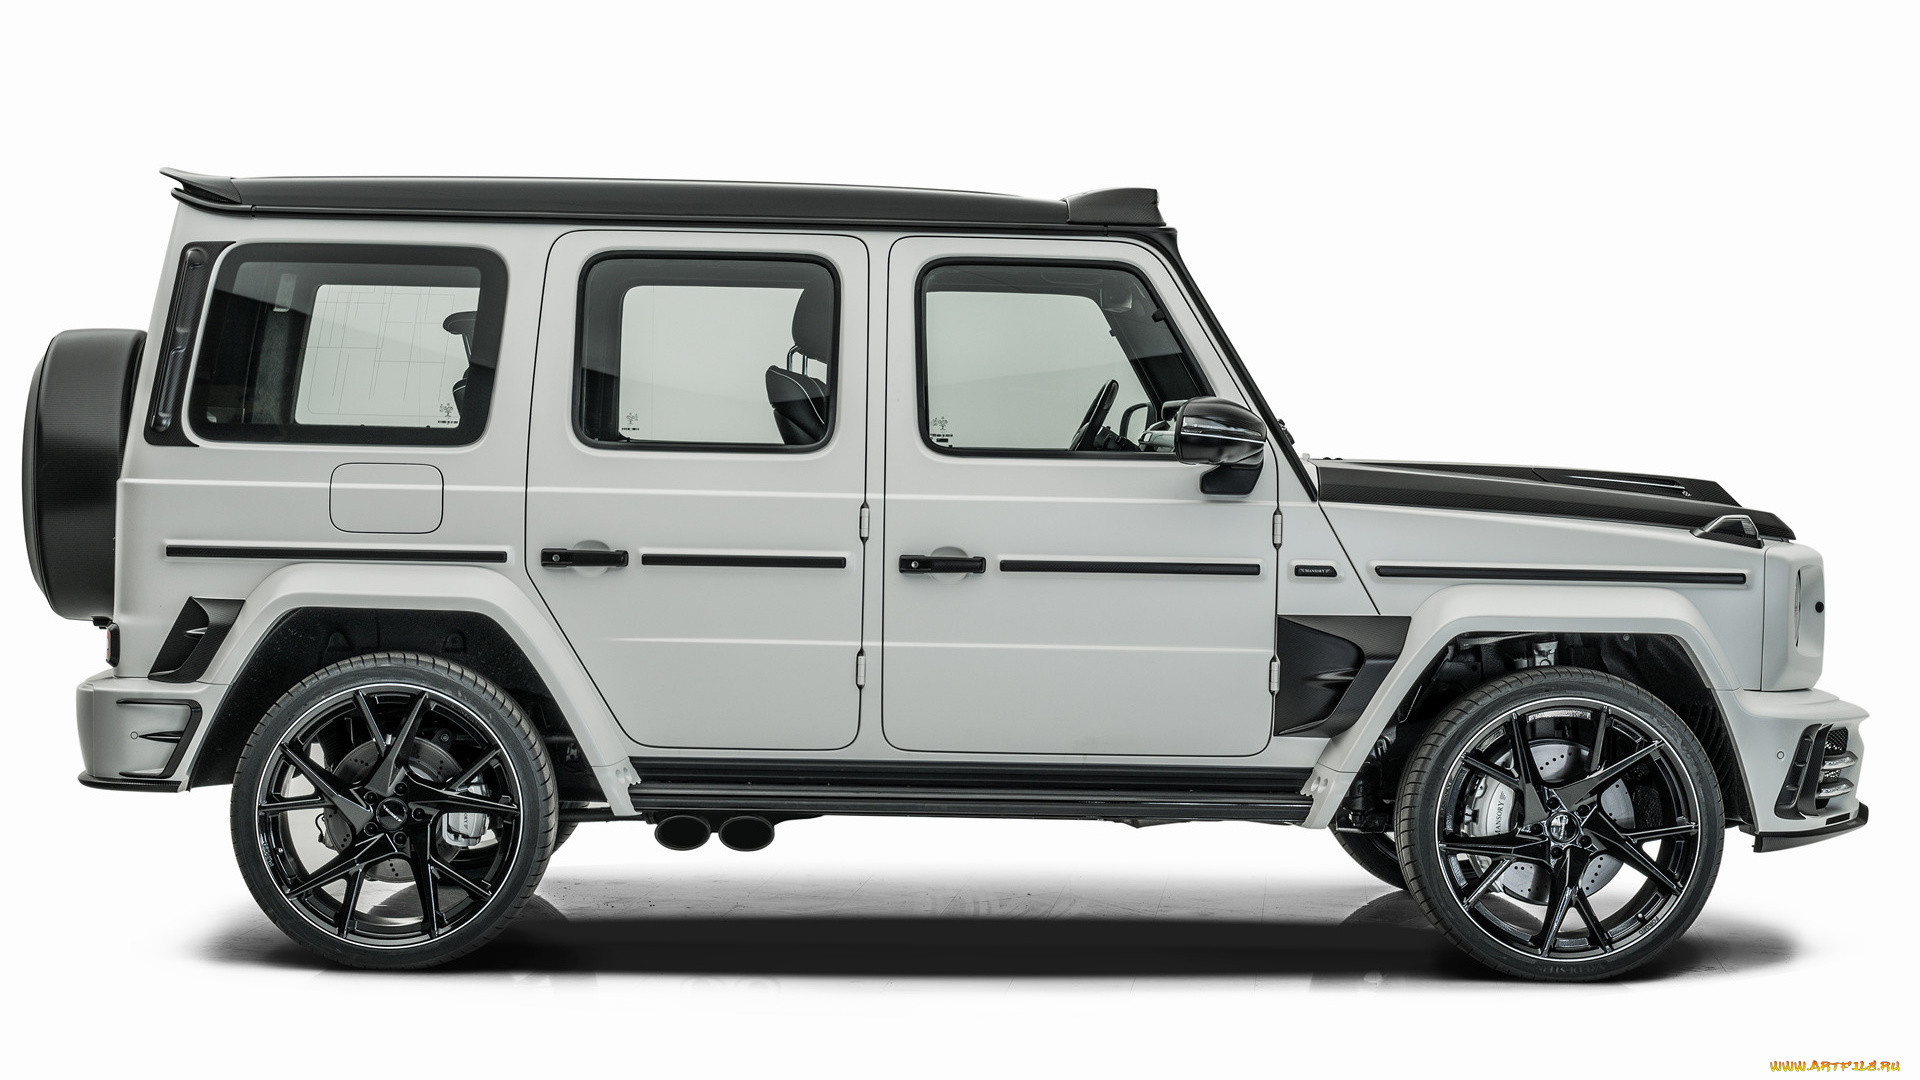 mercedes-benz g-class viva edition by mansory 2021, , mercedes-benz, mercedes, benz, g, class, viva, edition, by, mansory, 2021